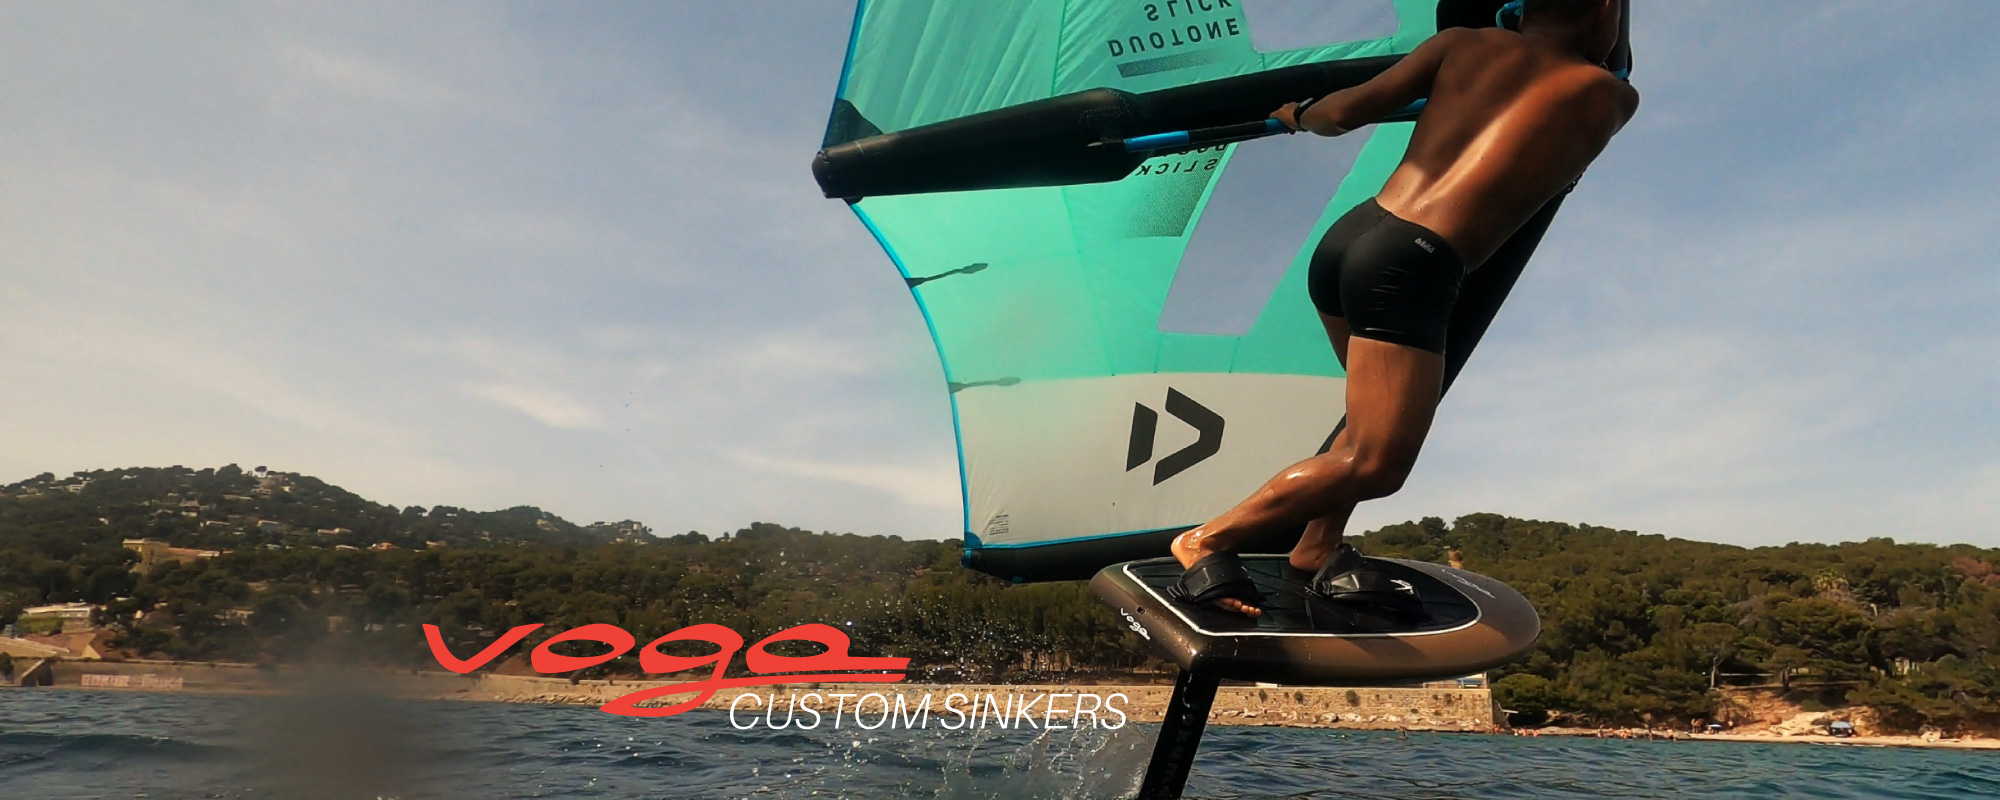 Products by Voga Marine : Custom Sinker Wing Foil Boards